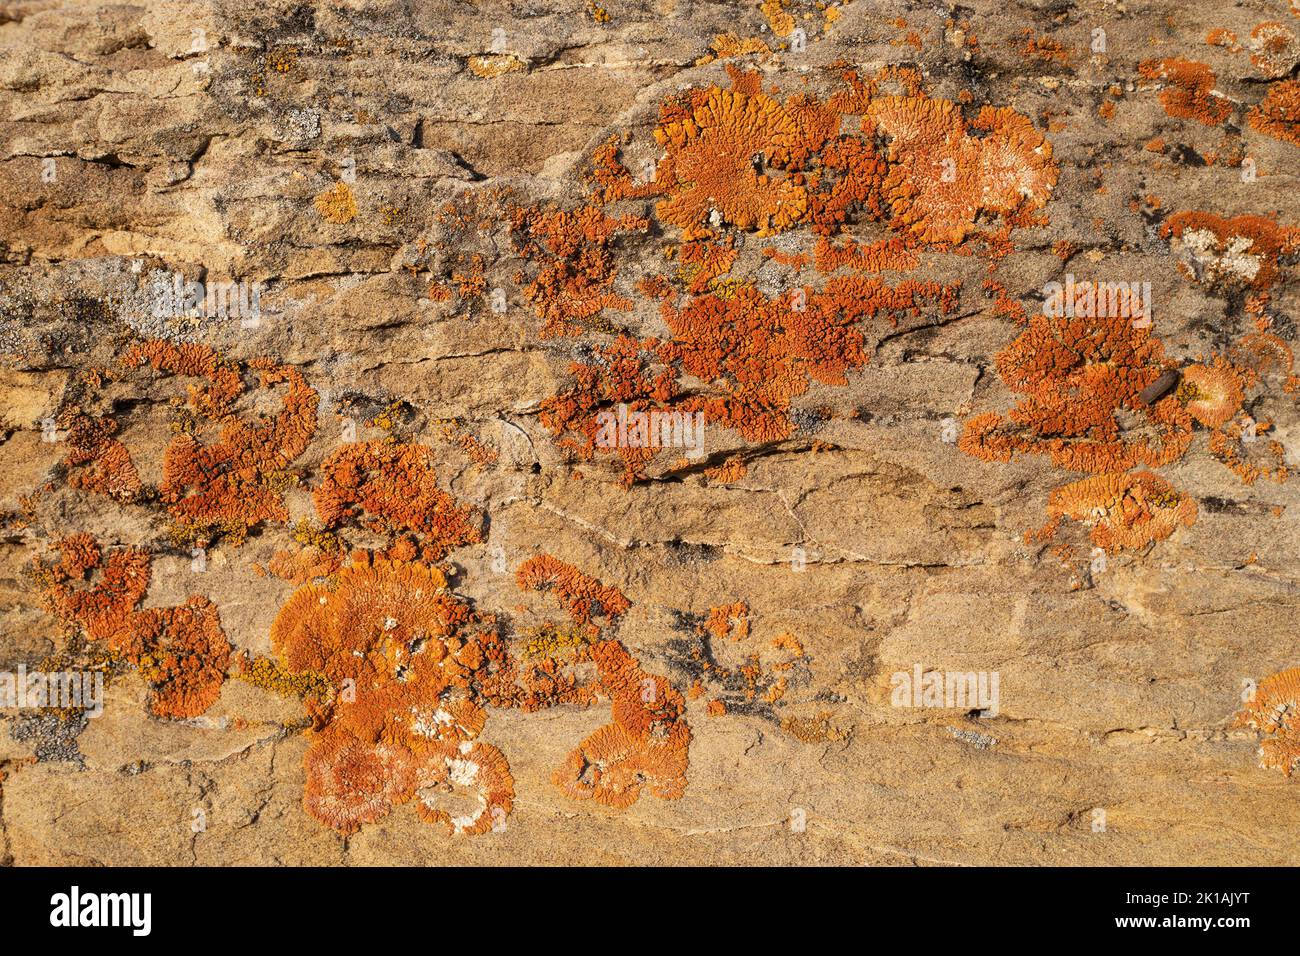 Paleocene sandstone outcrop of the Porcupine Hills Formation with orange lichens growing on the sedimentary rock Stock Photo